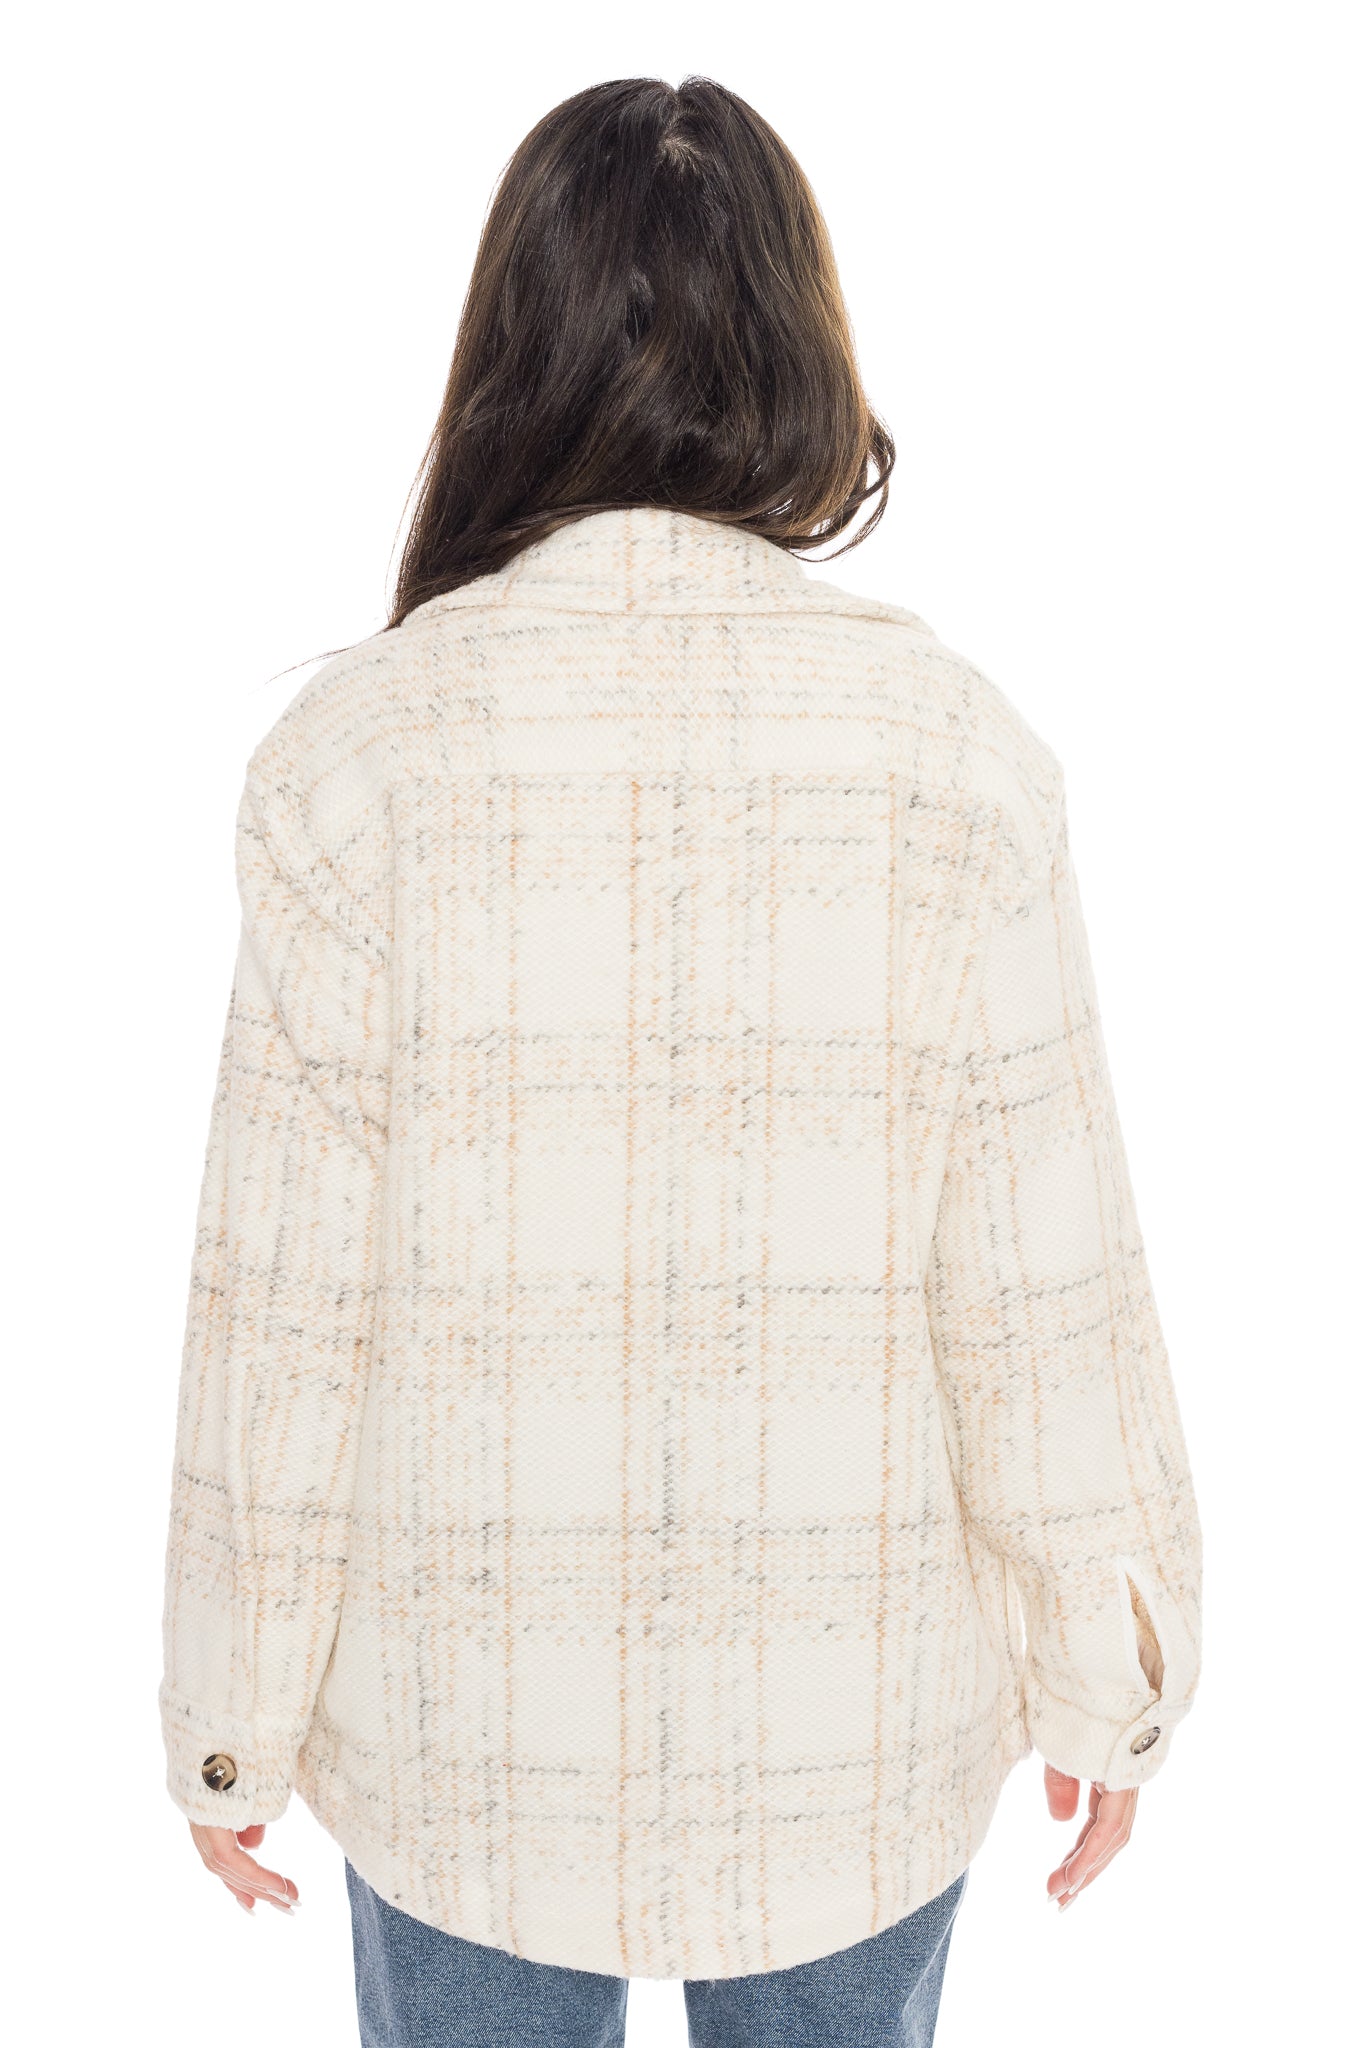 Marty Jacket by Saltwater Luxe